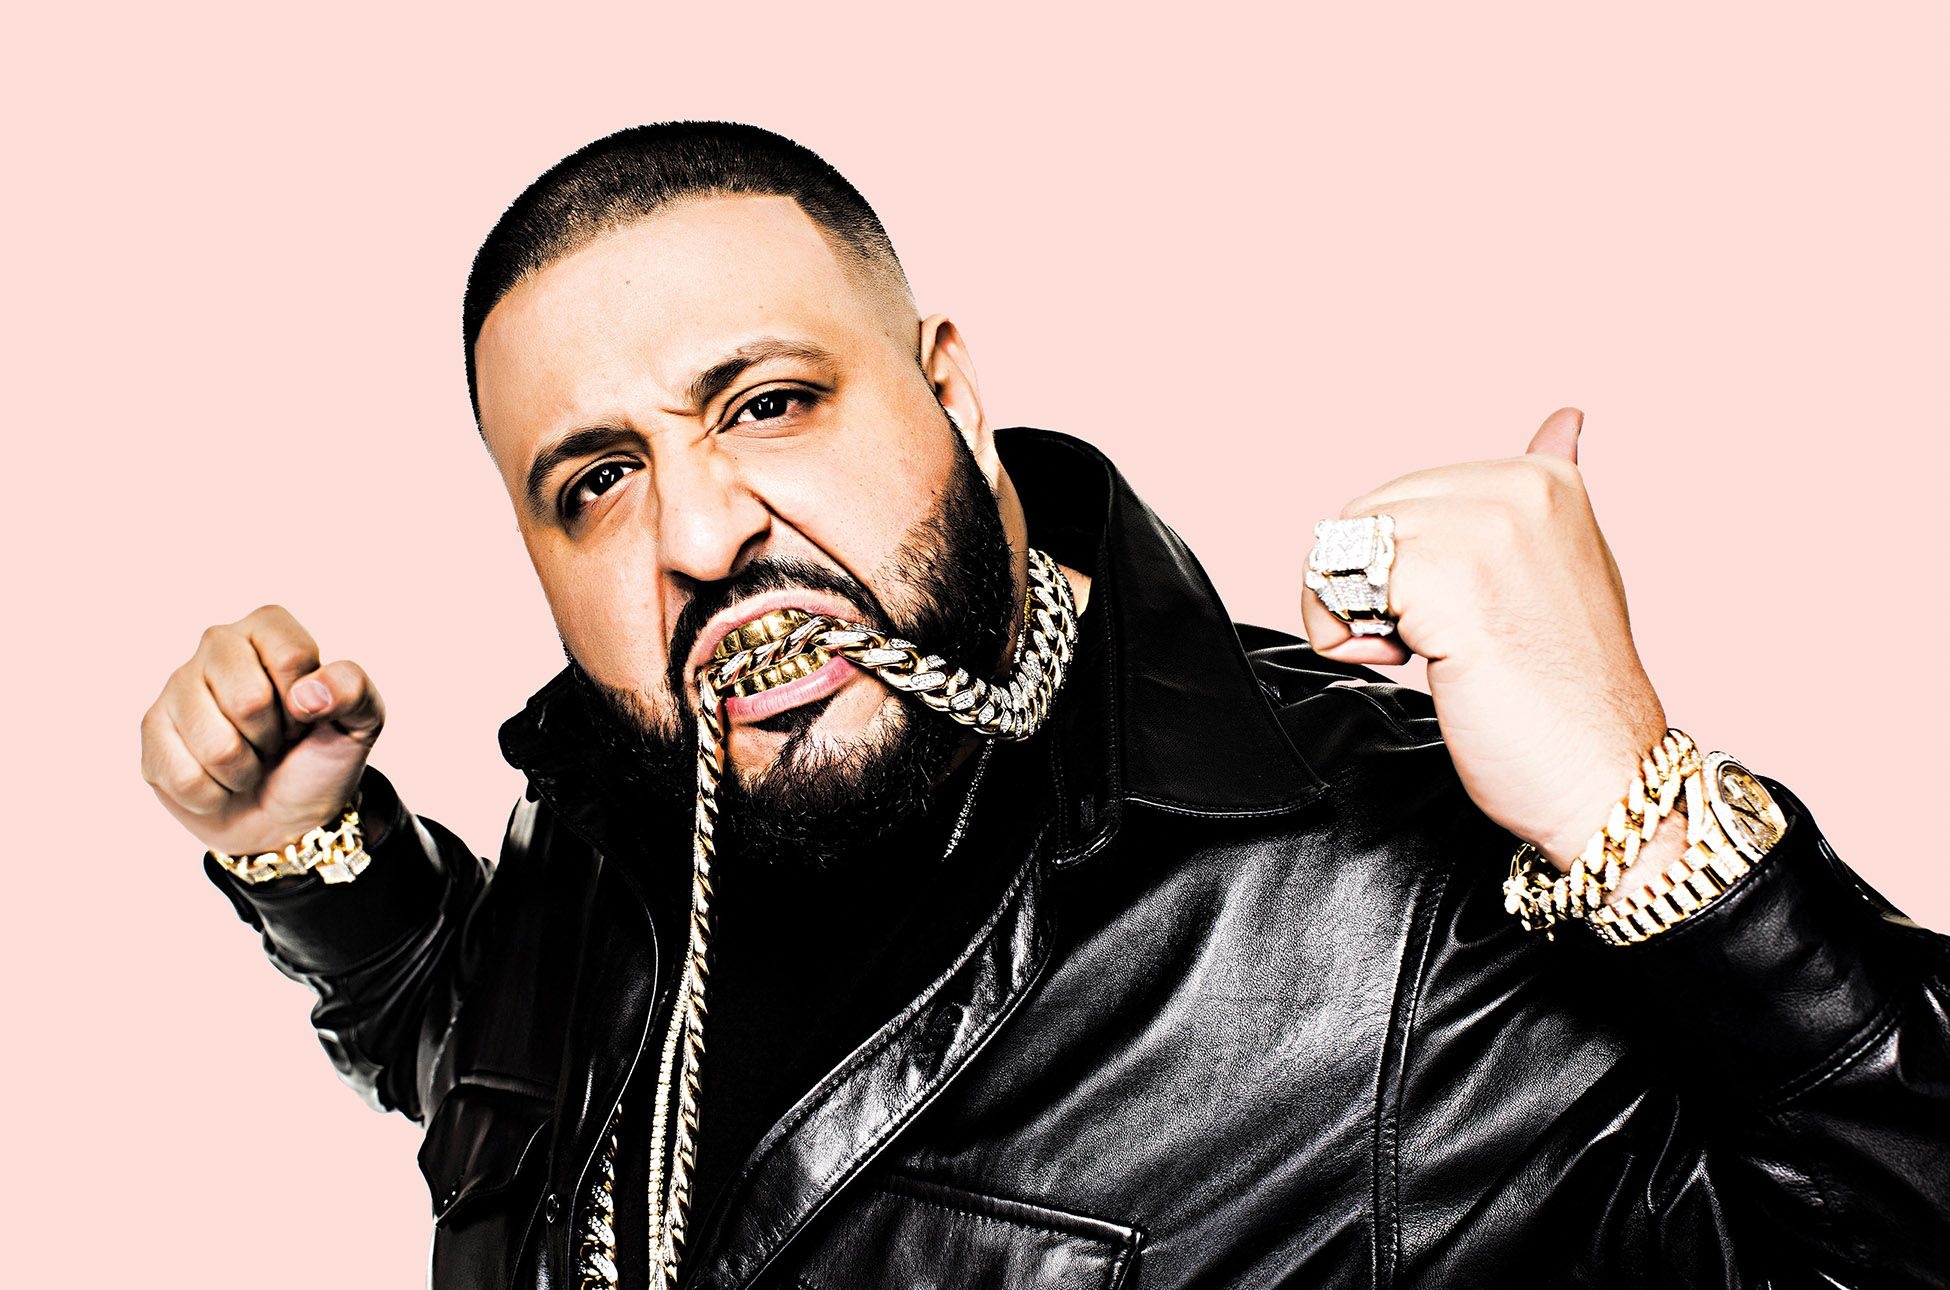 Dj Khaled Background posted by Michelle Anderson 1950x1290